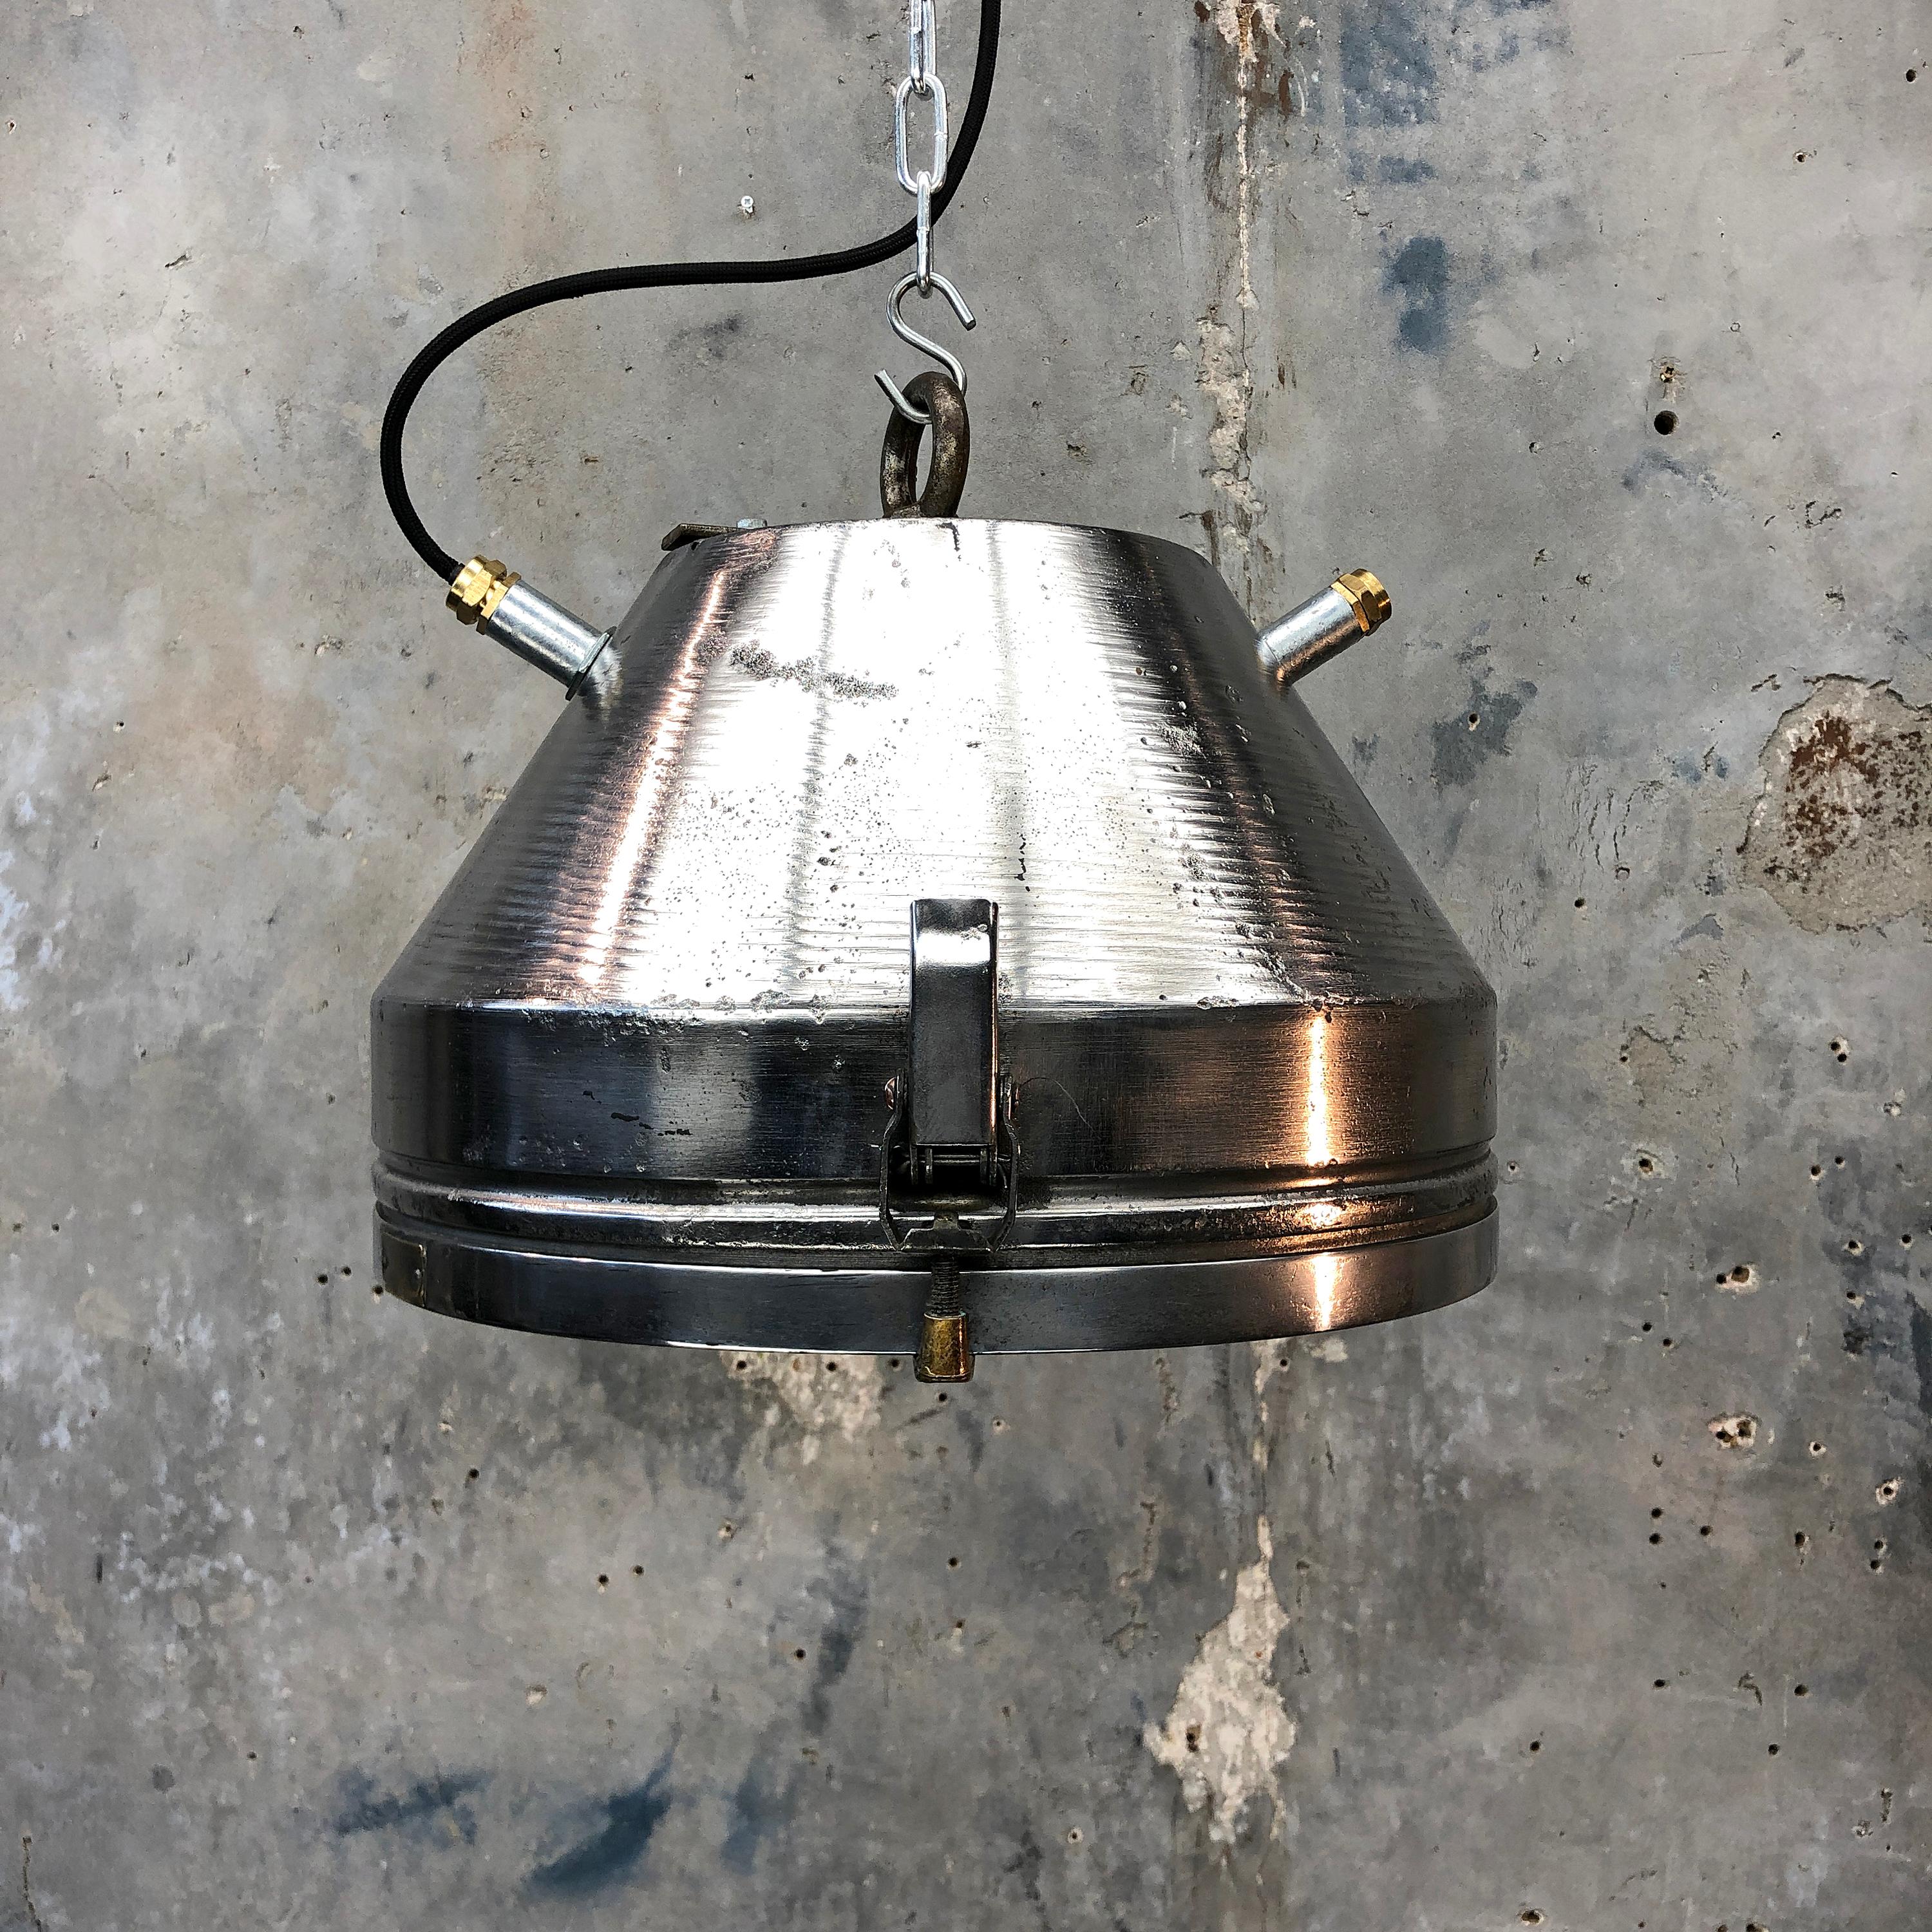 Iron and aluminium ceiling pendant with glass cover by VEB of Germany.

Reclaimed from Industrial settings then professionally restored in the UK ready for use in modern interiors. 

The main body of the light is spun steel and the glass covered